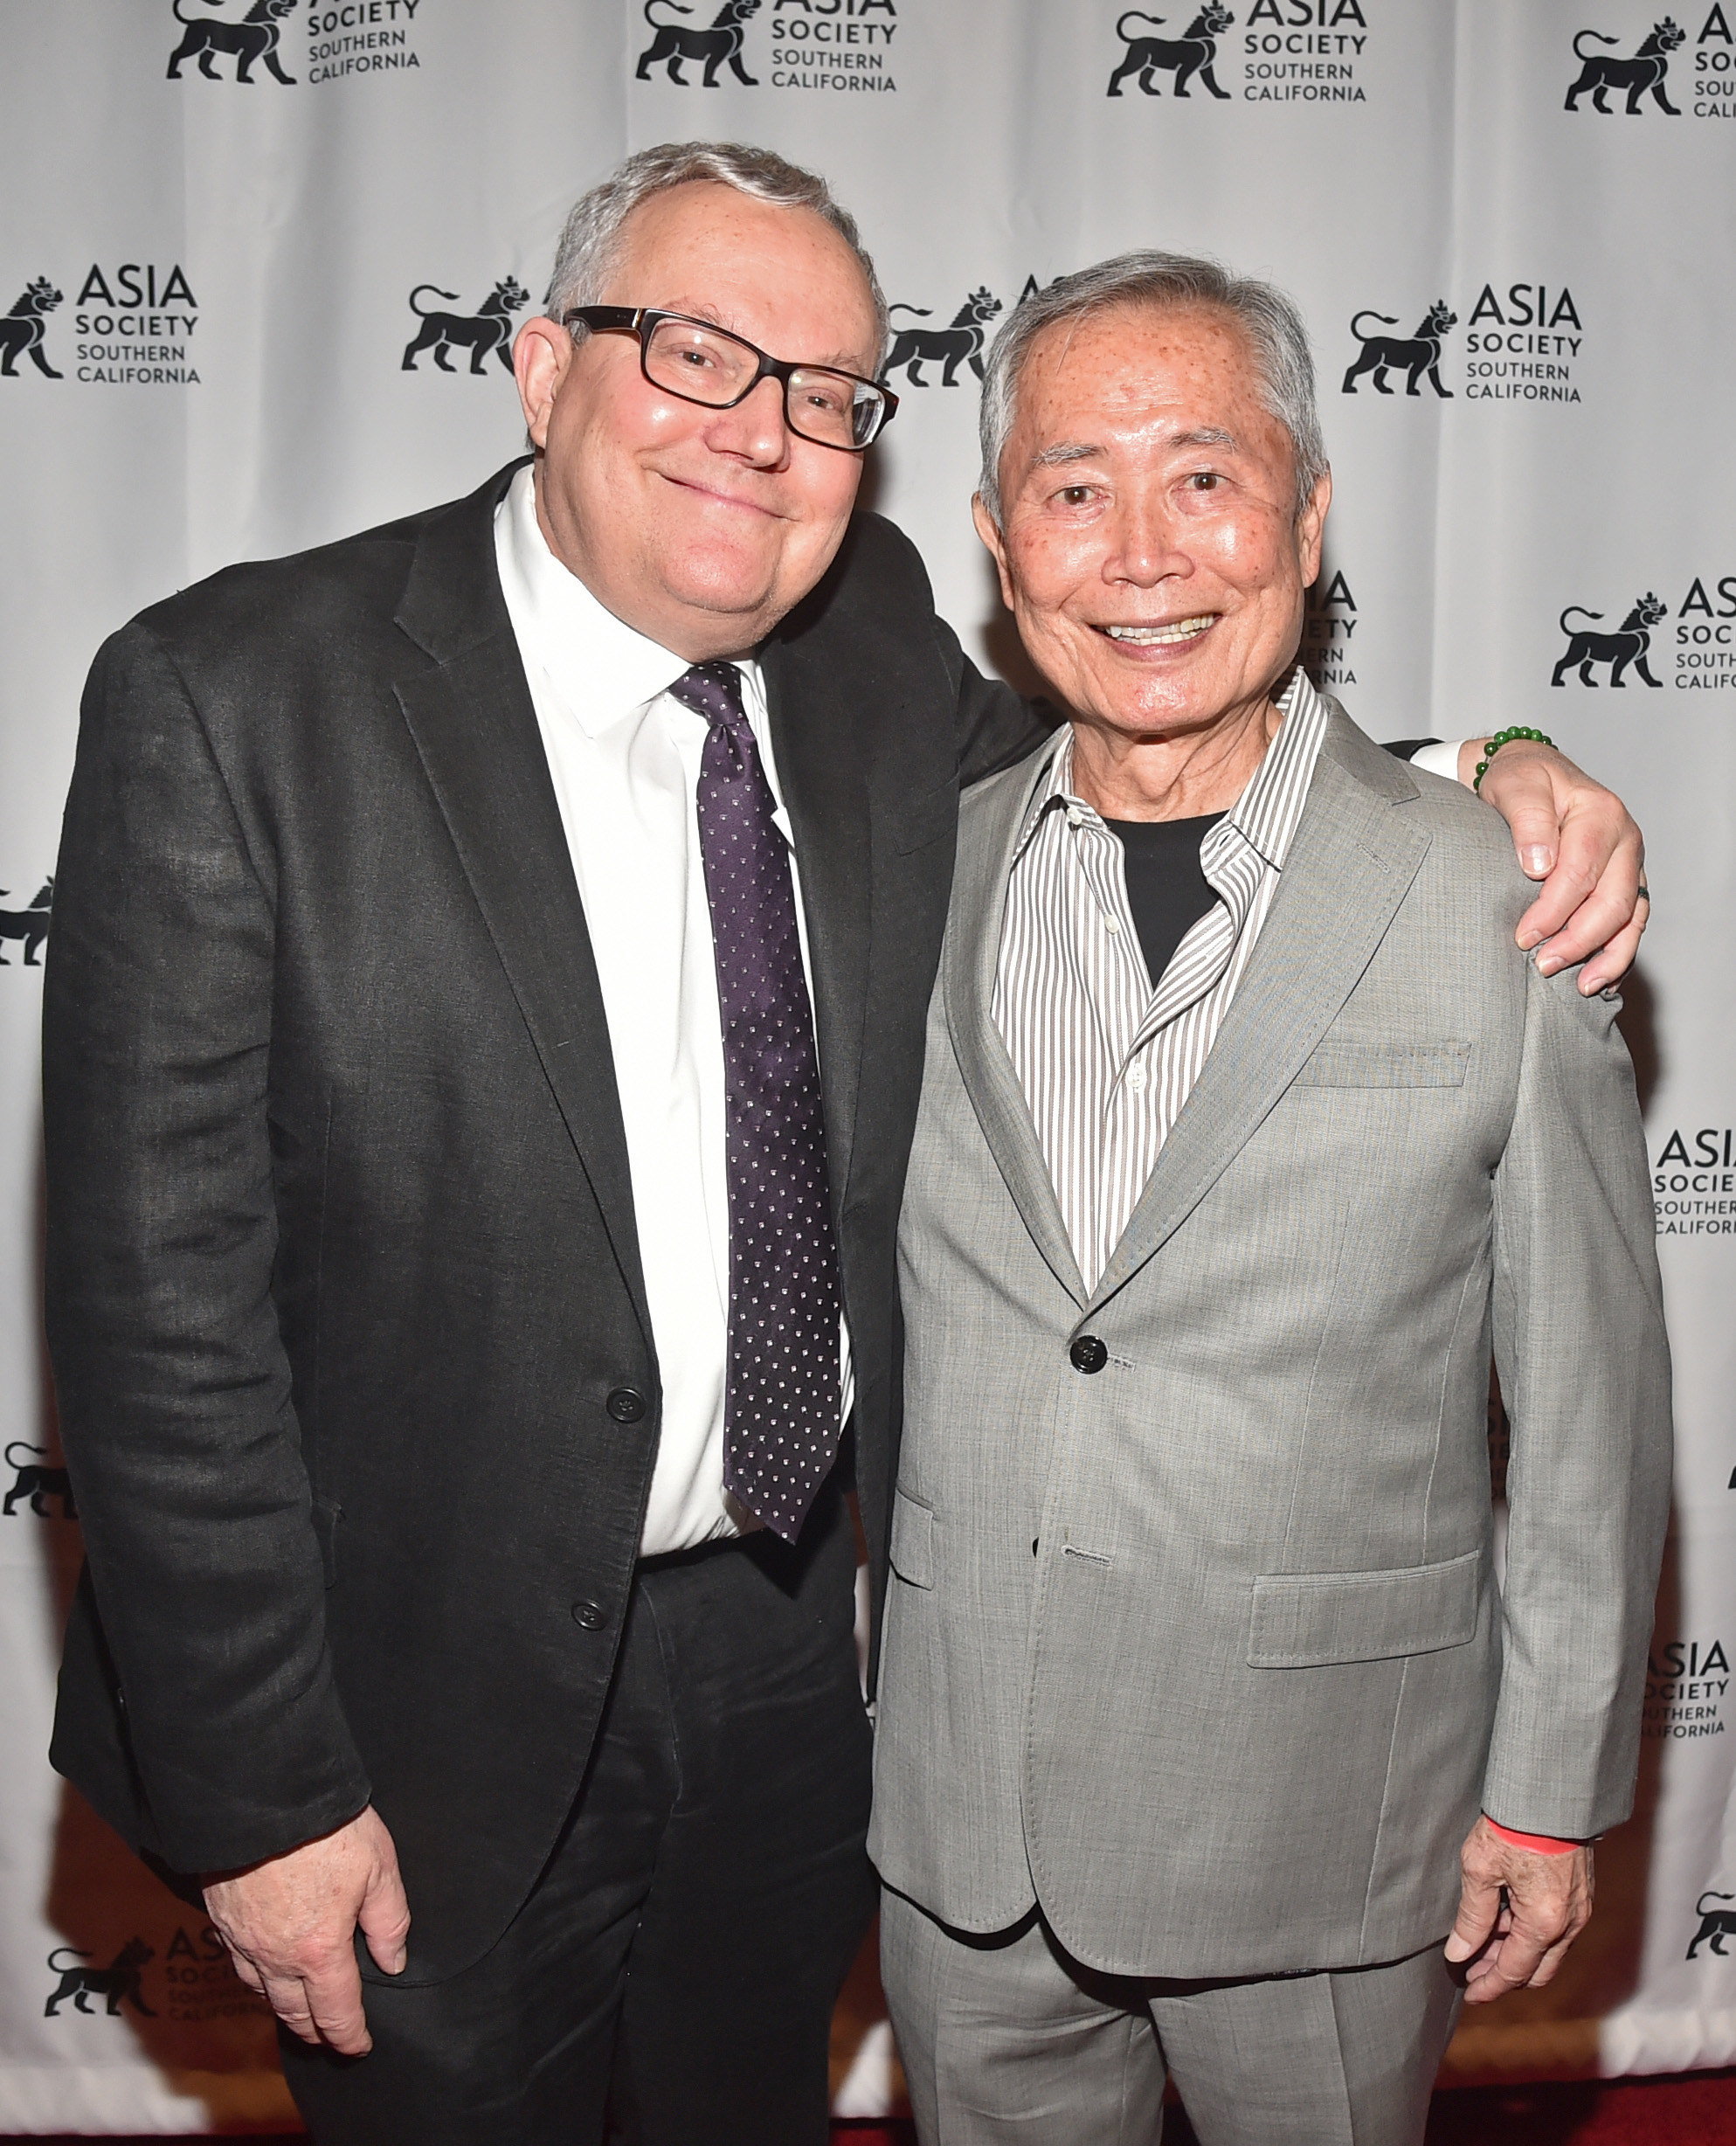 Brad Altman and George Takei attend the US-Asia Entertainment Summit